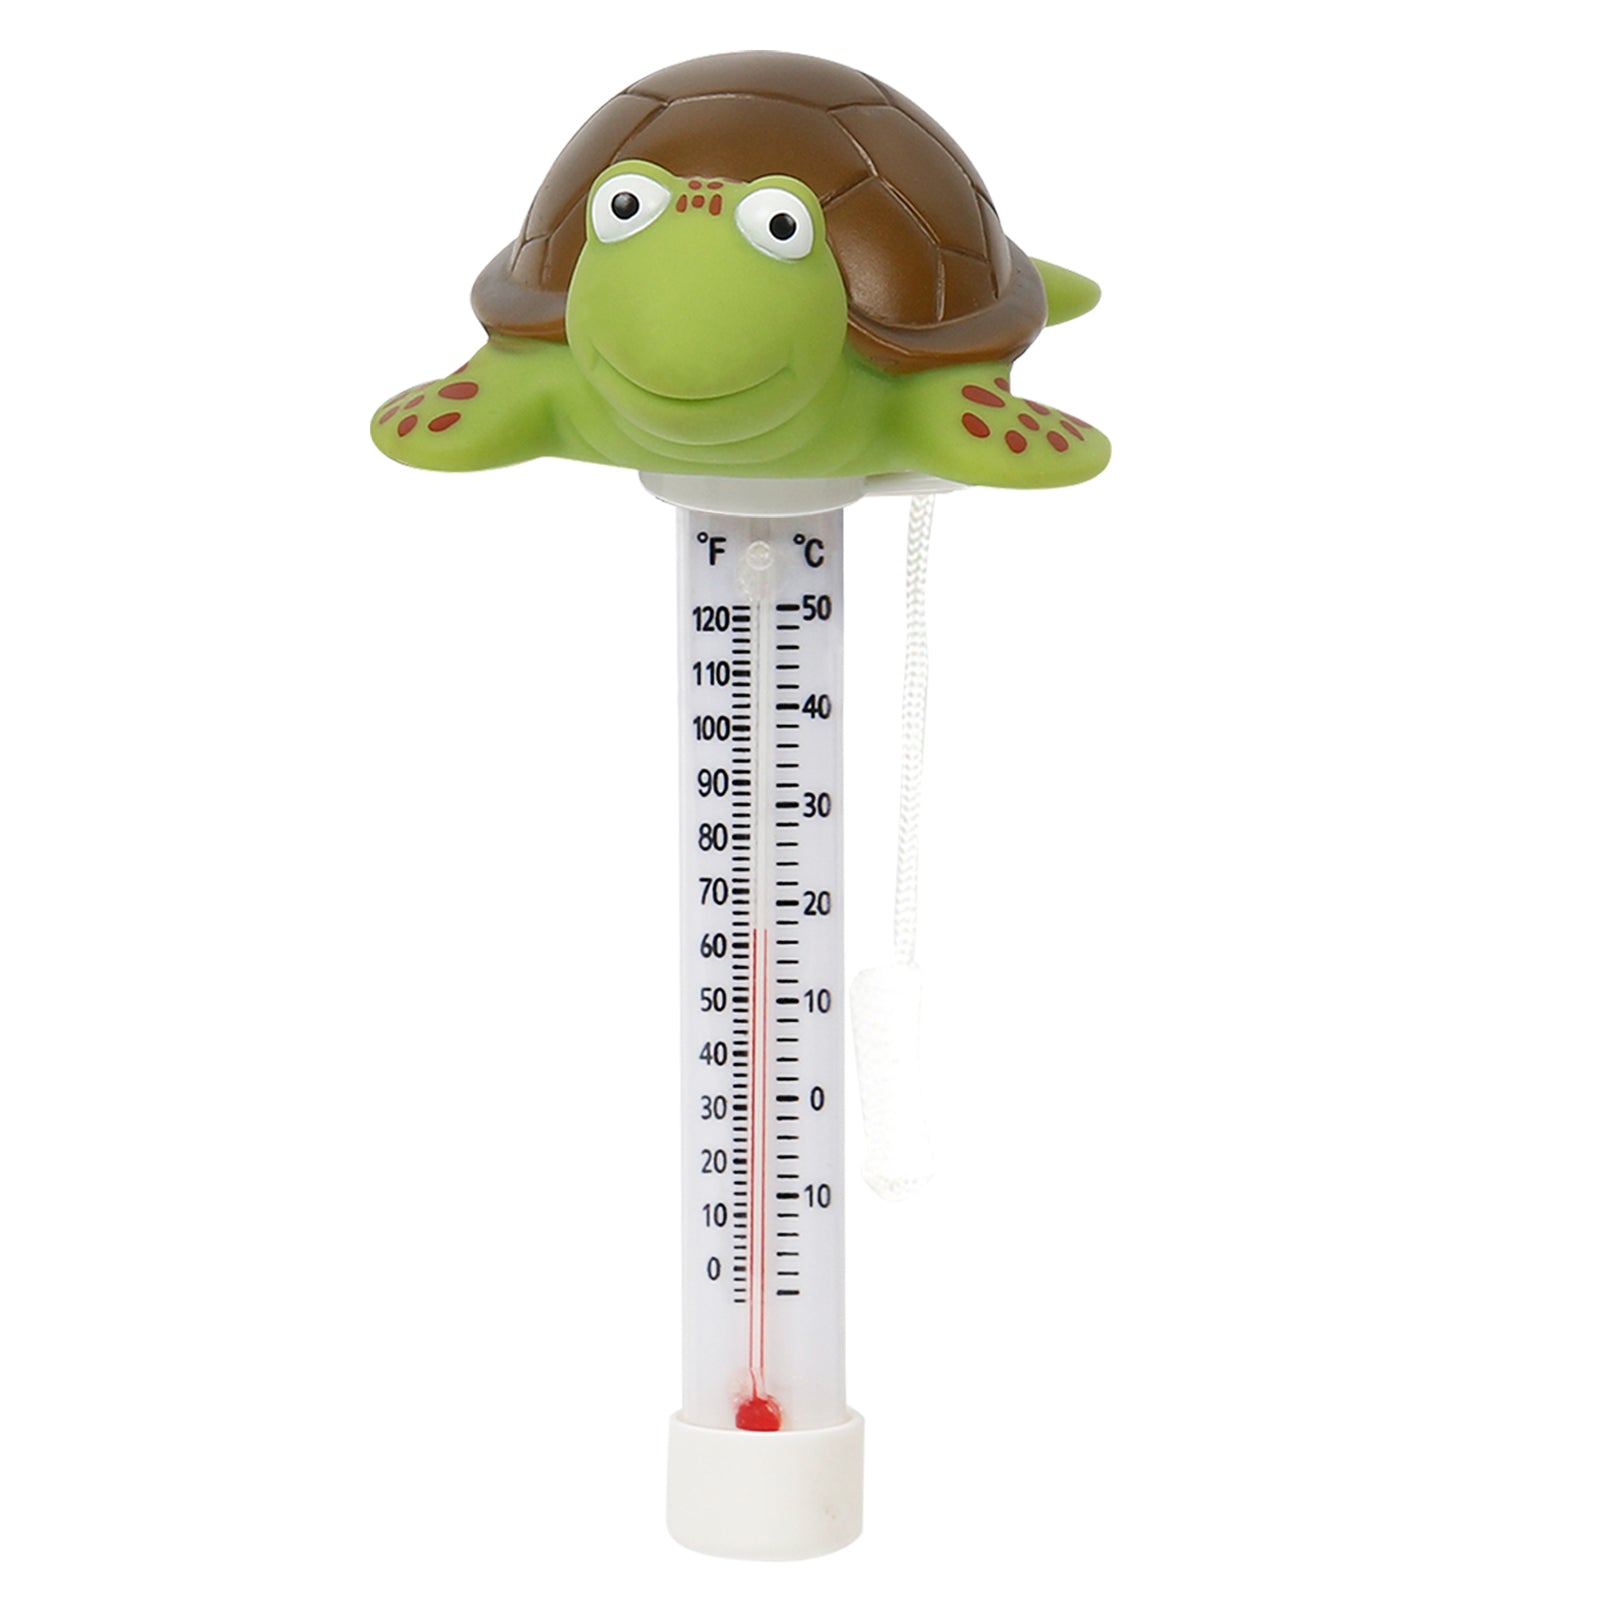 https://www.momjunction.com/wp-content/uploads/product-images/xy-wq-floating-pool-thermometer_afl1473.jpg